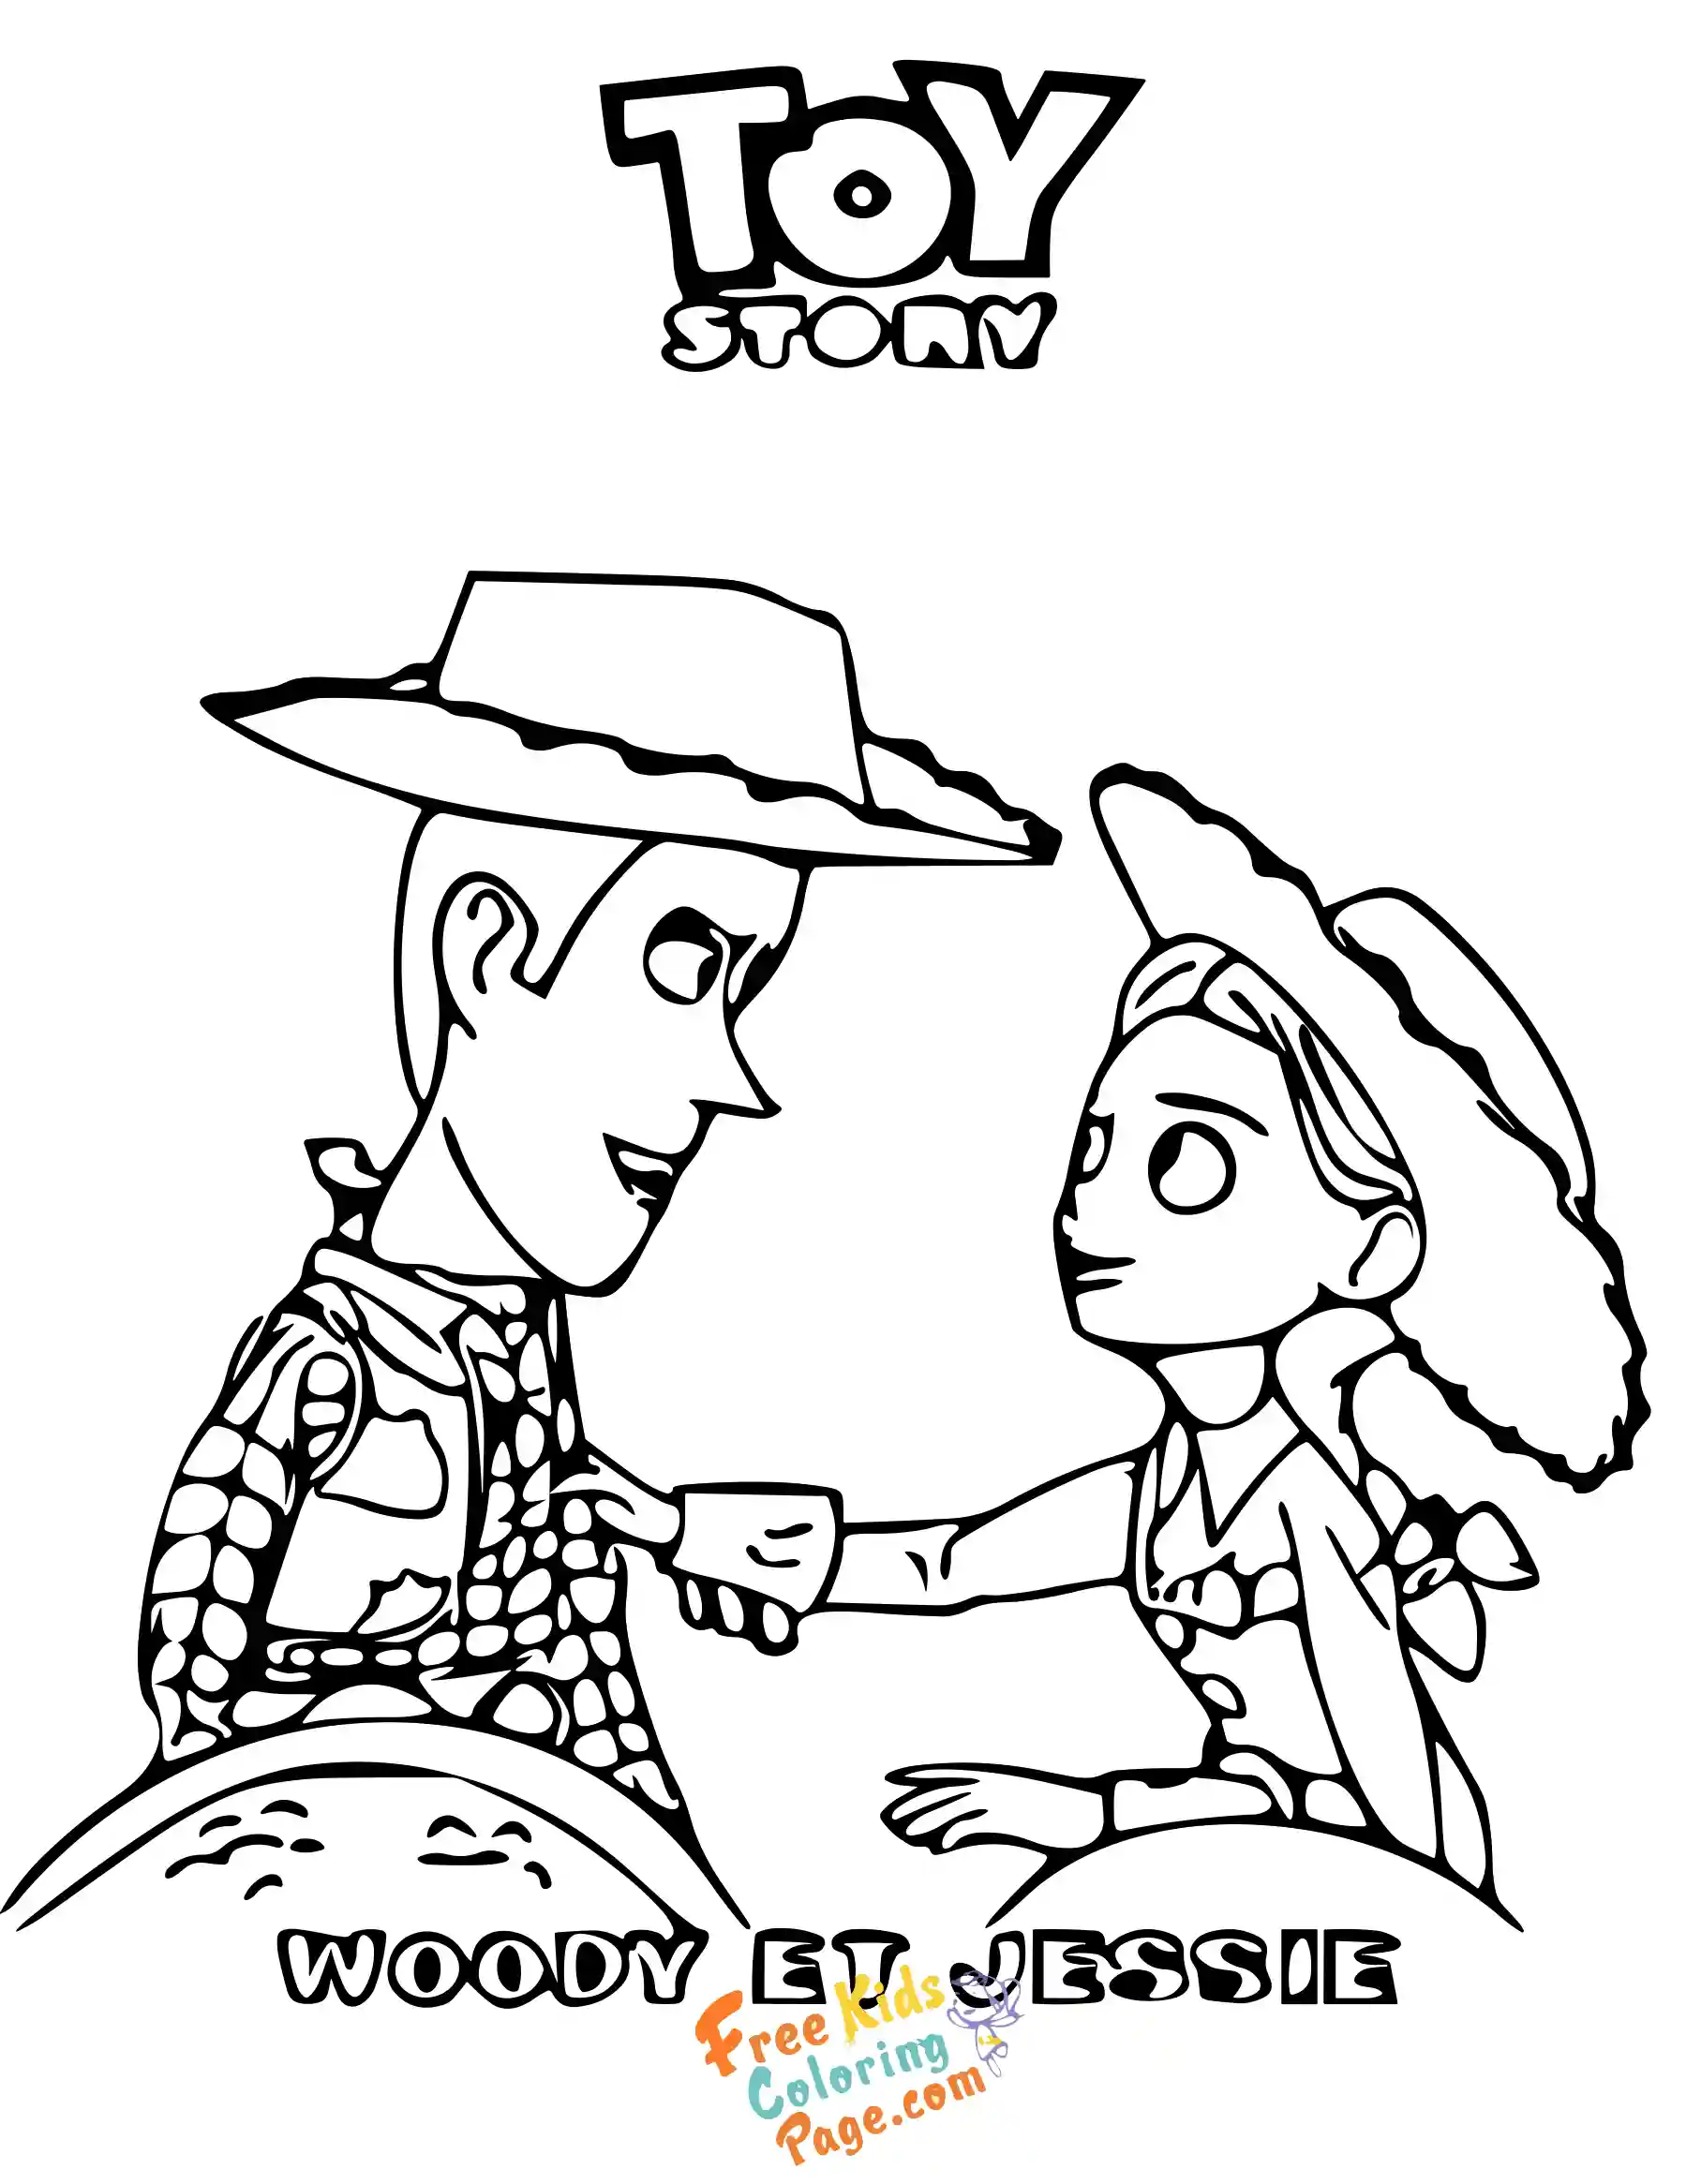 Jessie et Woody Toy Story 3 ande 4 coloring pages